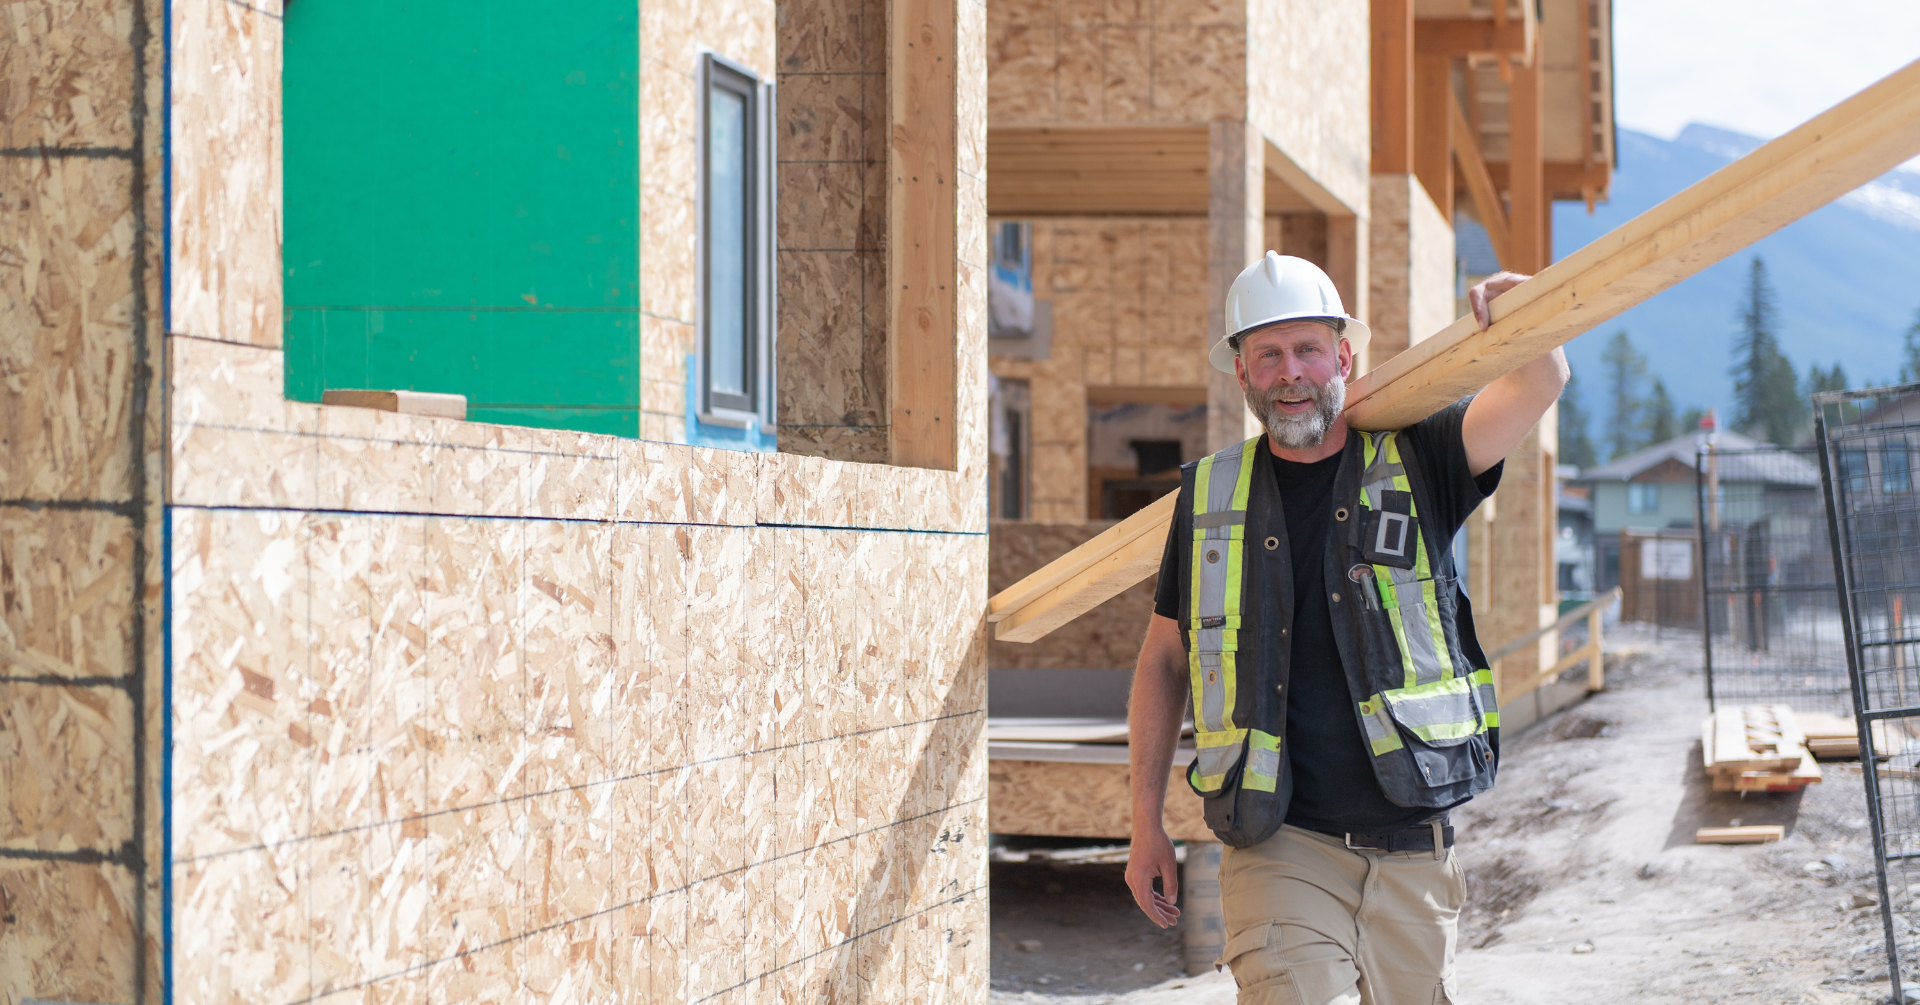 Ashton Construction Services - ACS - Canmore, Alberta - Blog - How to Choose the Best Commercial Construction Company - 4